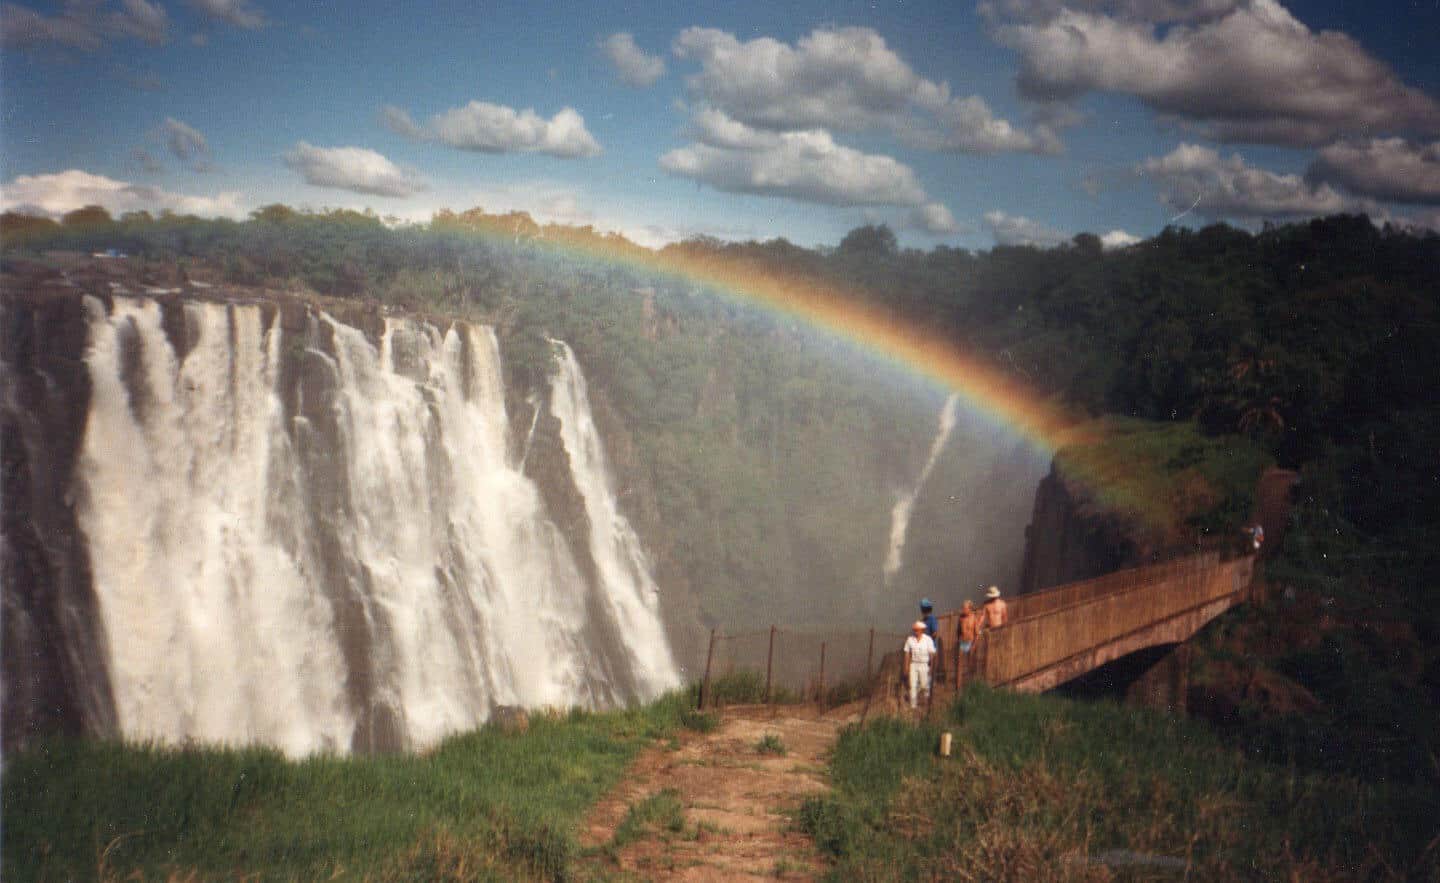 Victoria Falls. My 2 years as a child Expat in Zambia